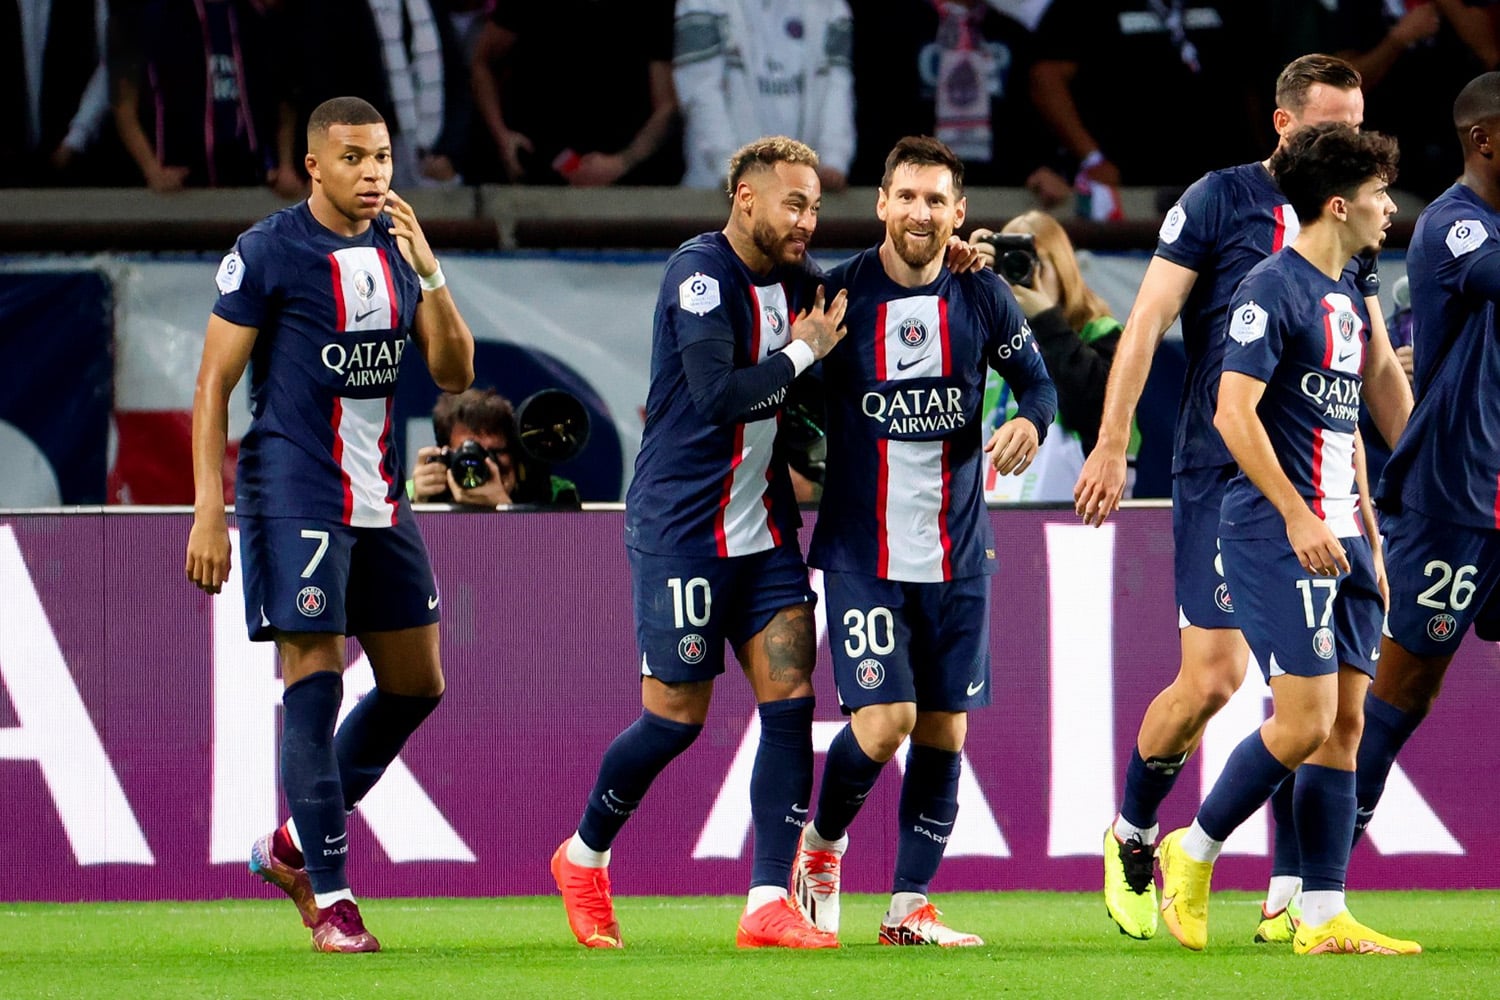 PSG players Messi, Neymar, and Mbappe celebrate with teammates after scoring goal